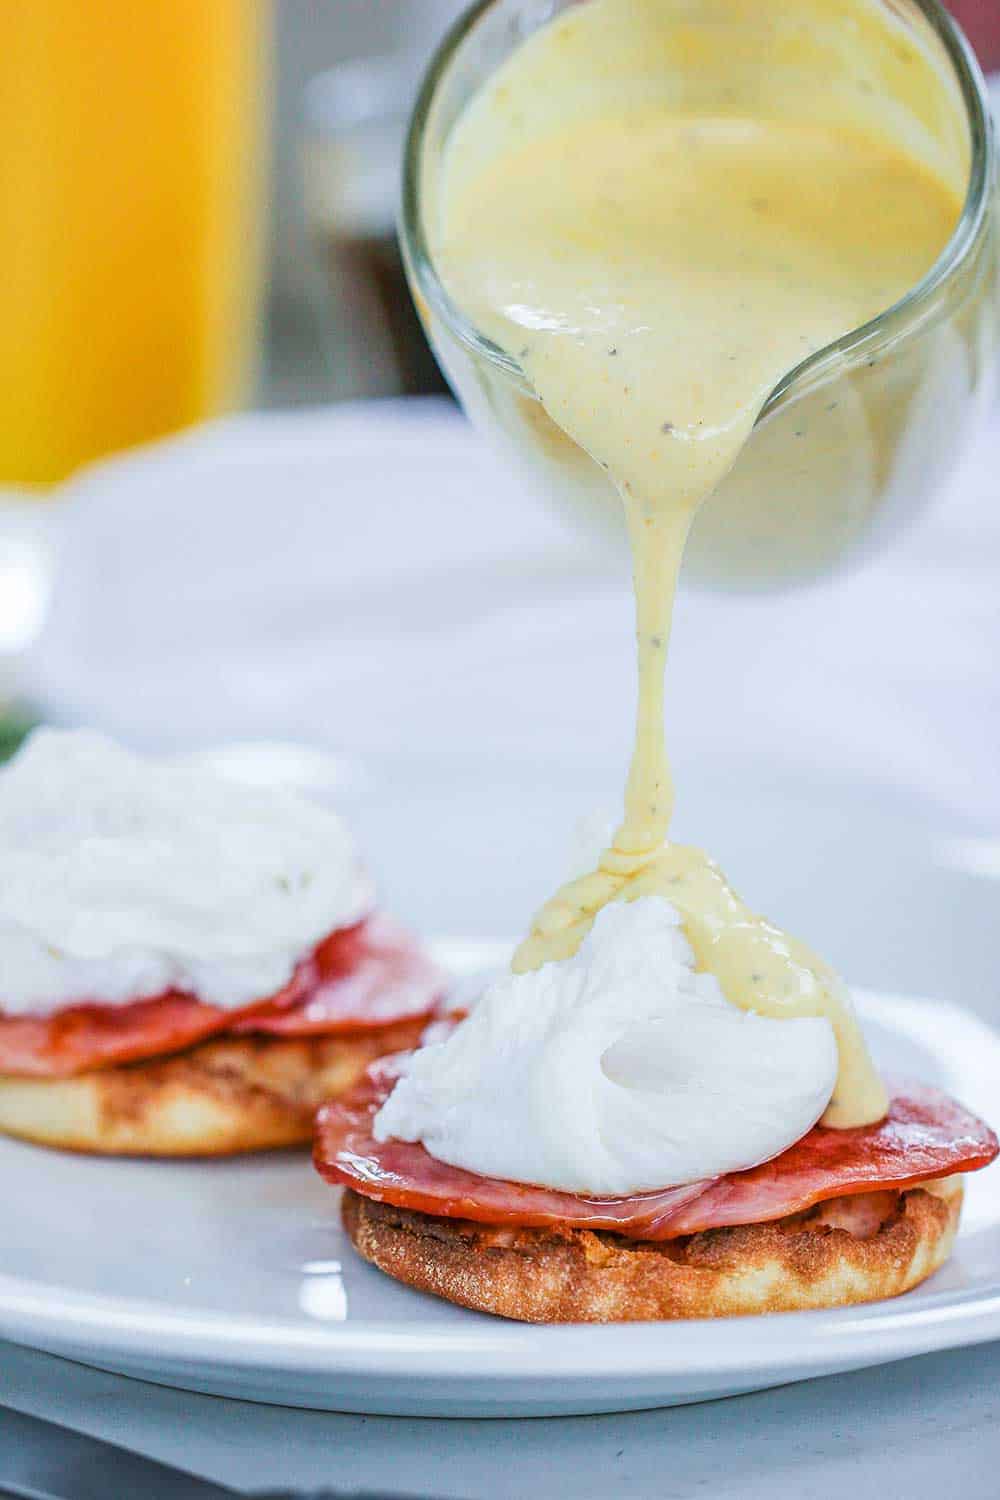 A small glass pitcher of Hollandaise sauce being poured onto eggs Benedict.